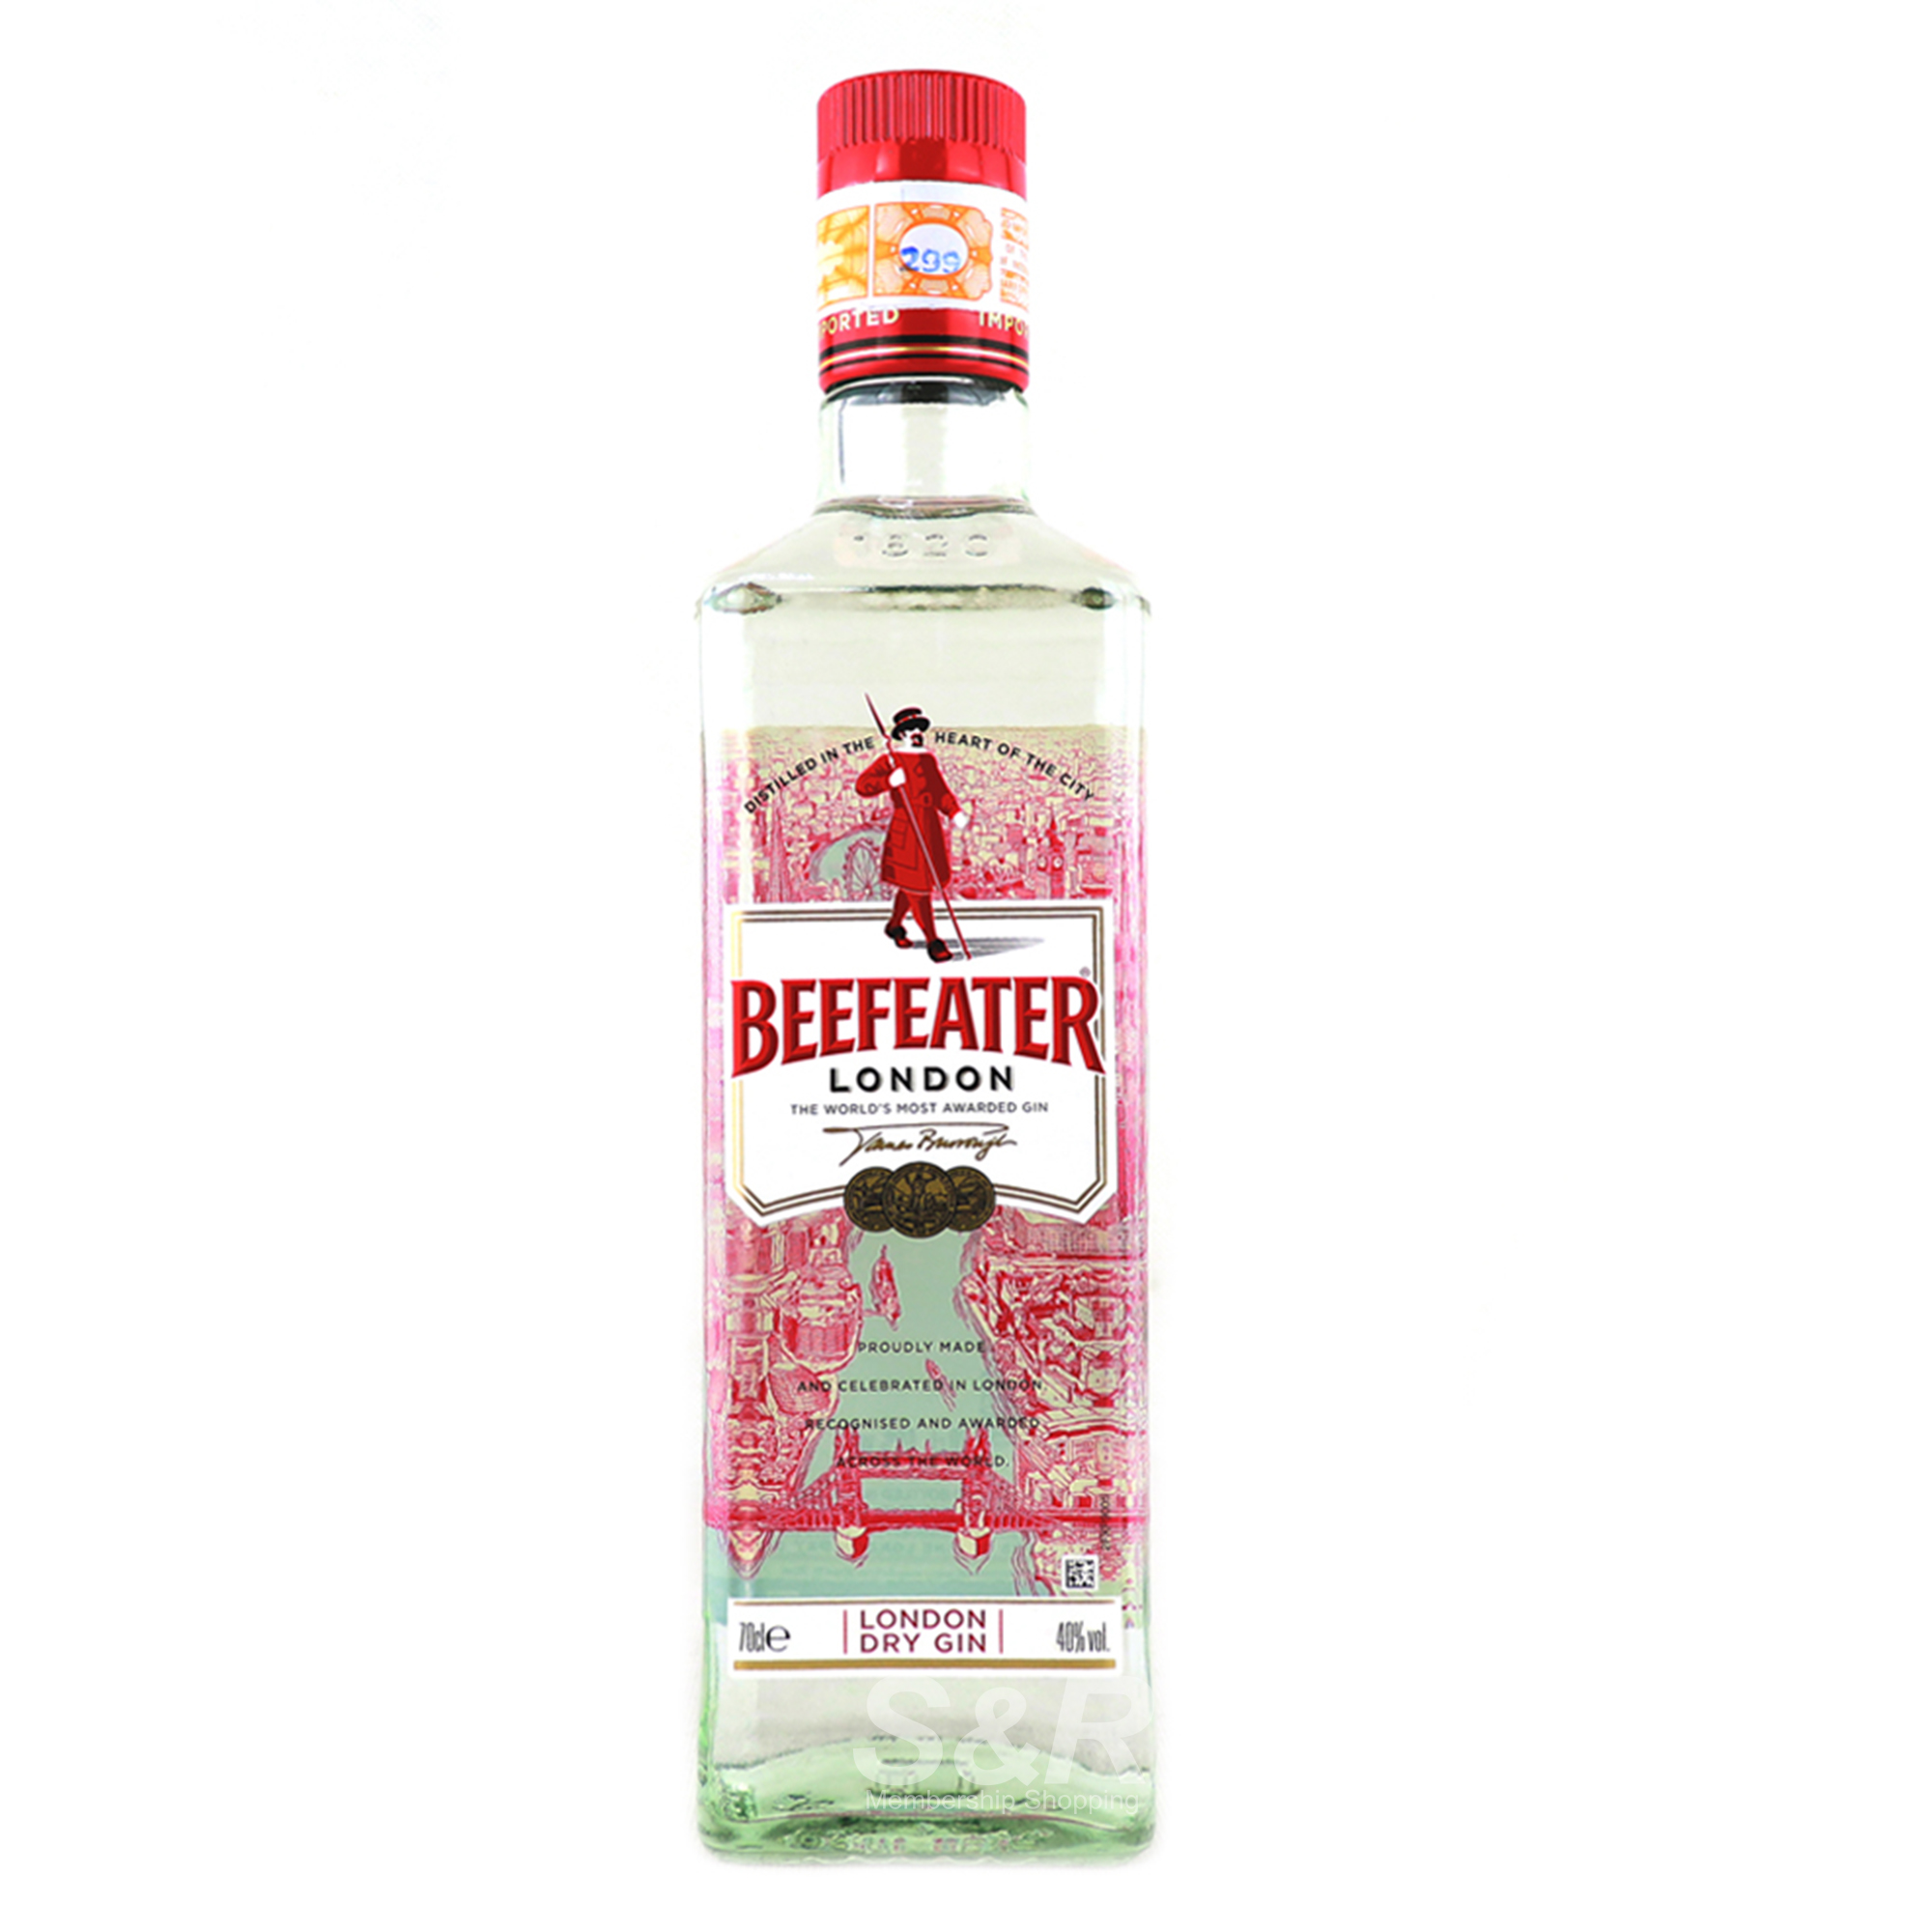 Beefeater London Dry Gin 700mL